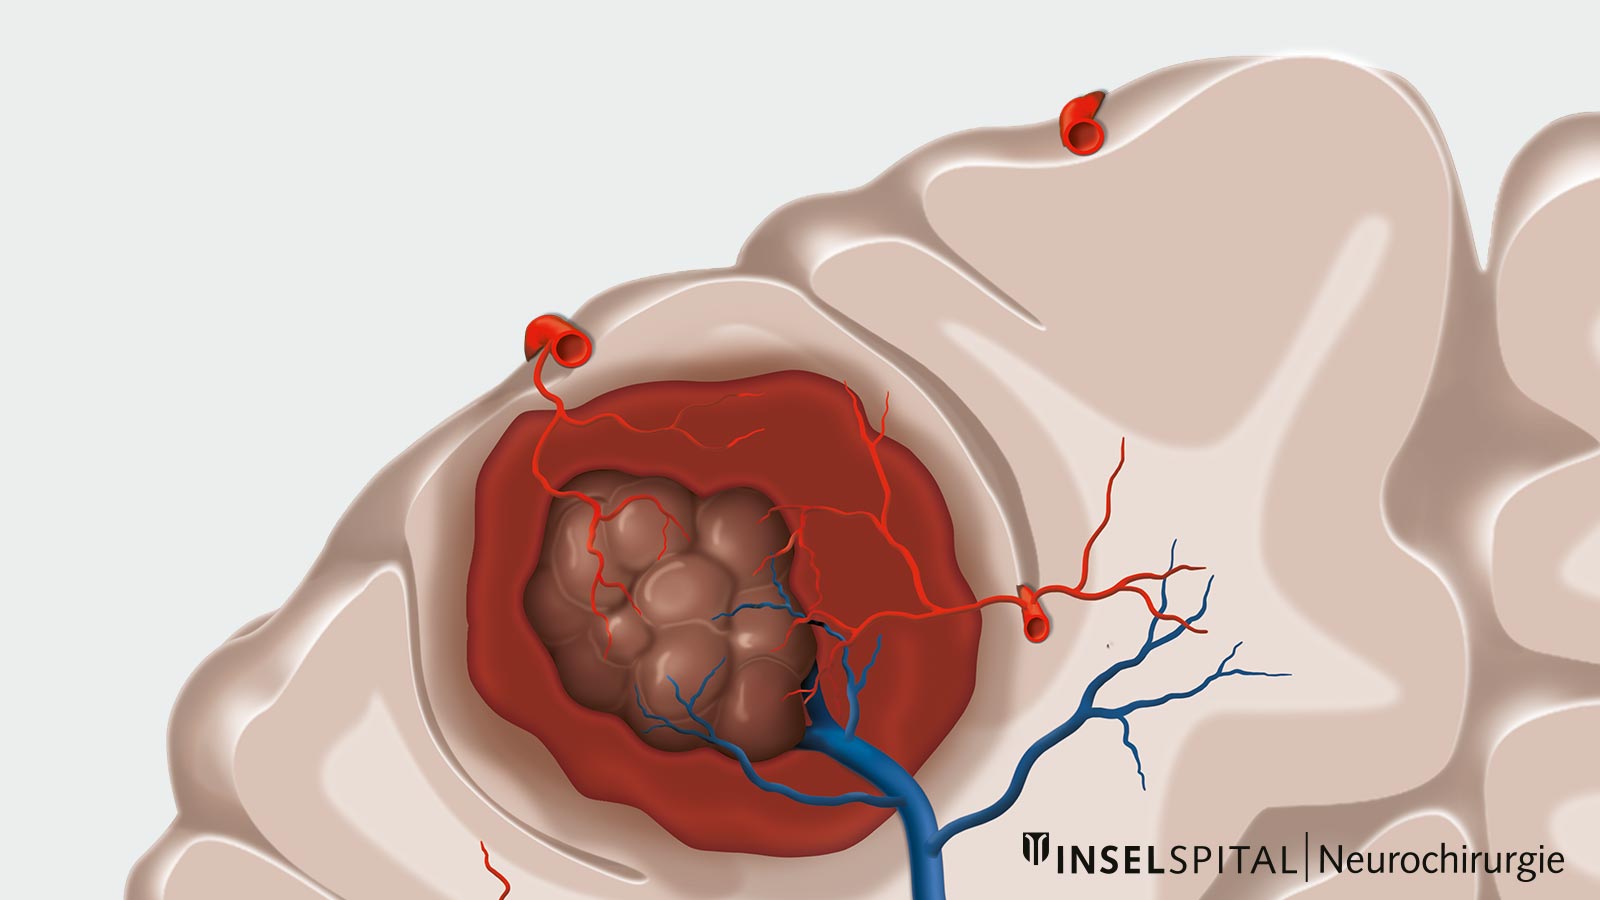 Drawing of hemorrhaged cavernoma. Connected to the cavernoma are some blood vessels (arteries red, veins blue).